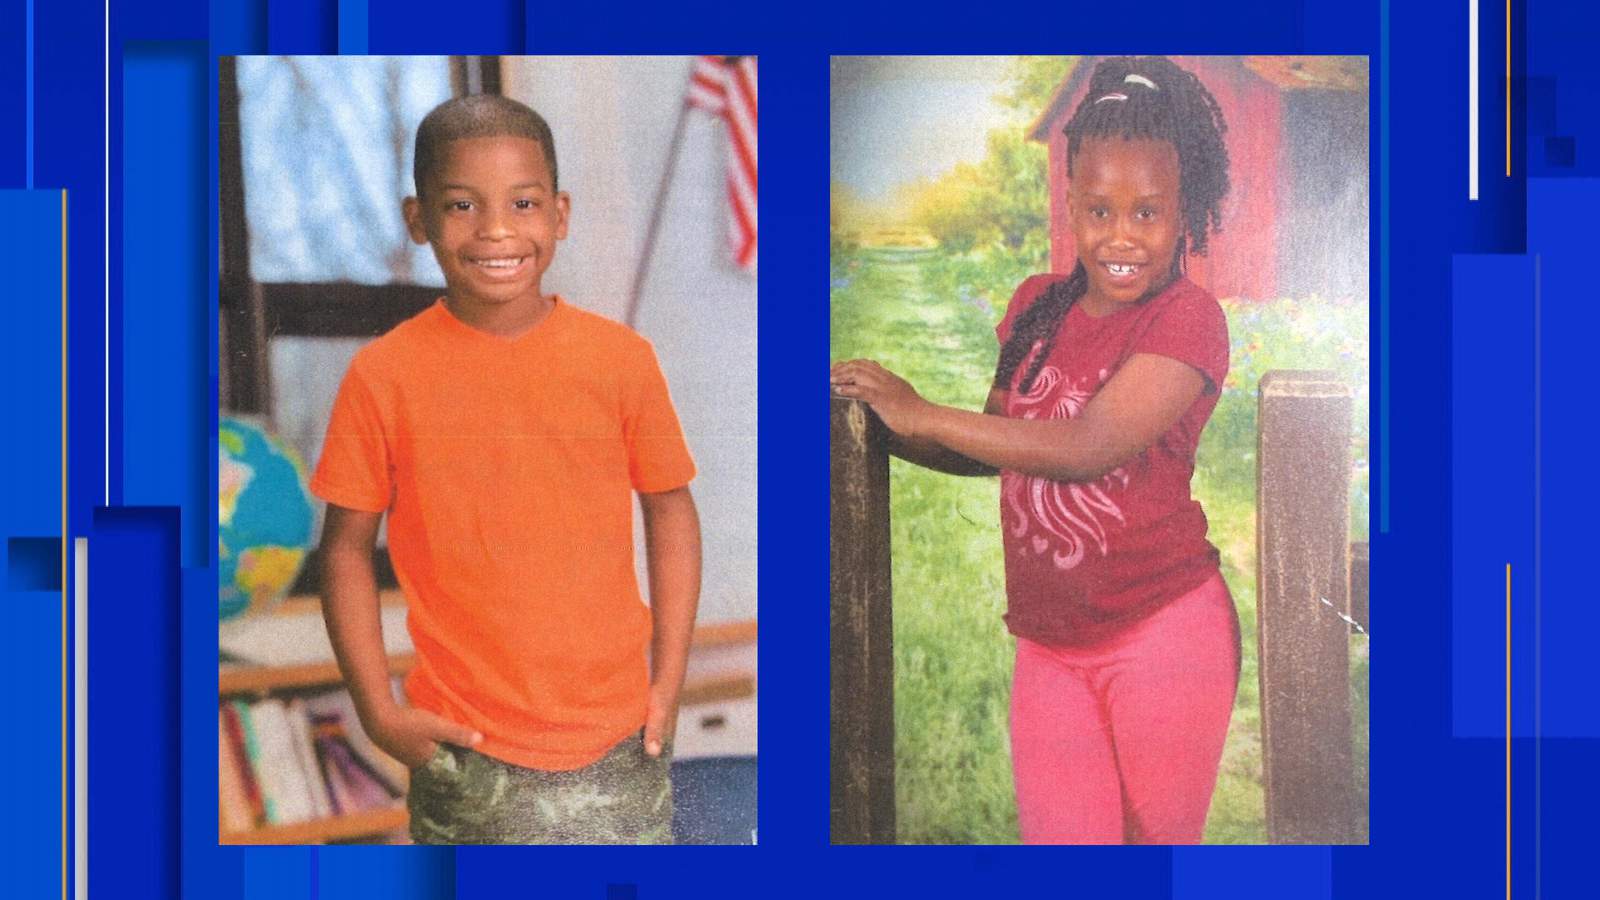 2 young siblings found safe after going missing on Detroit’s west side, police say